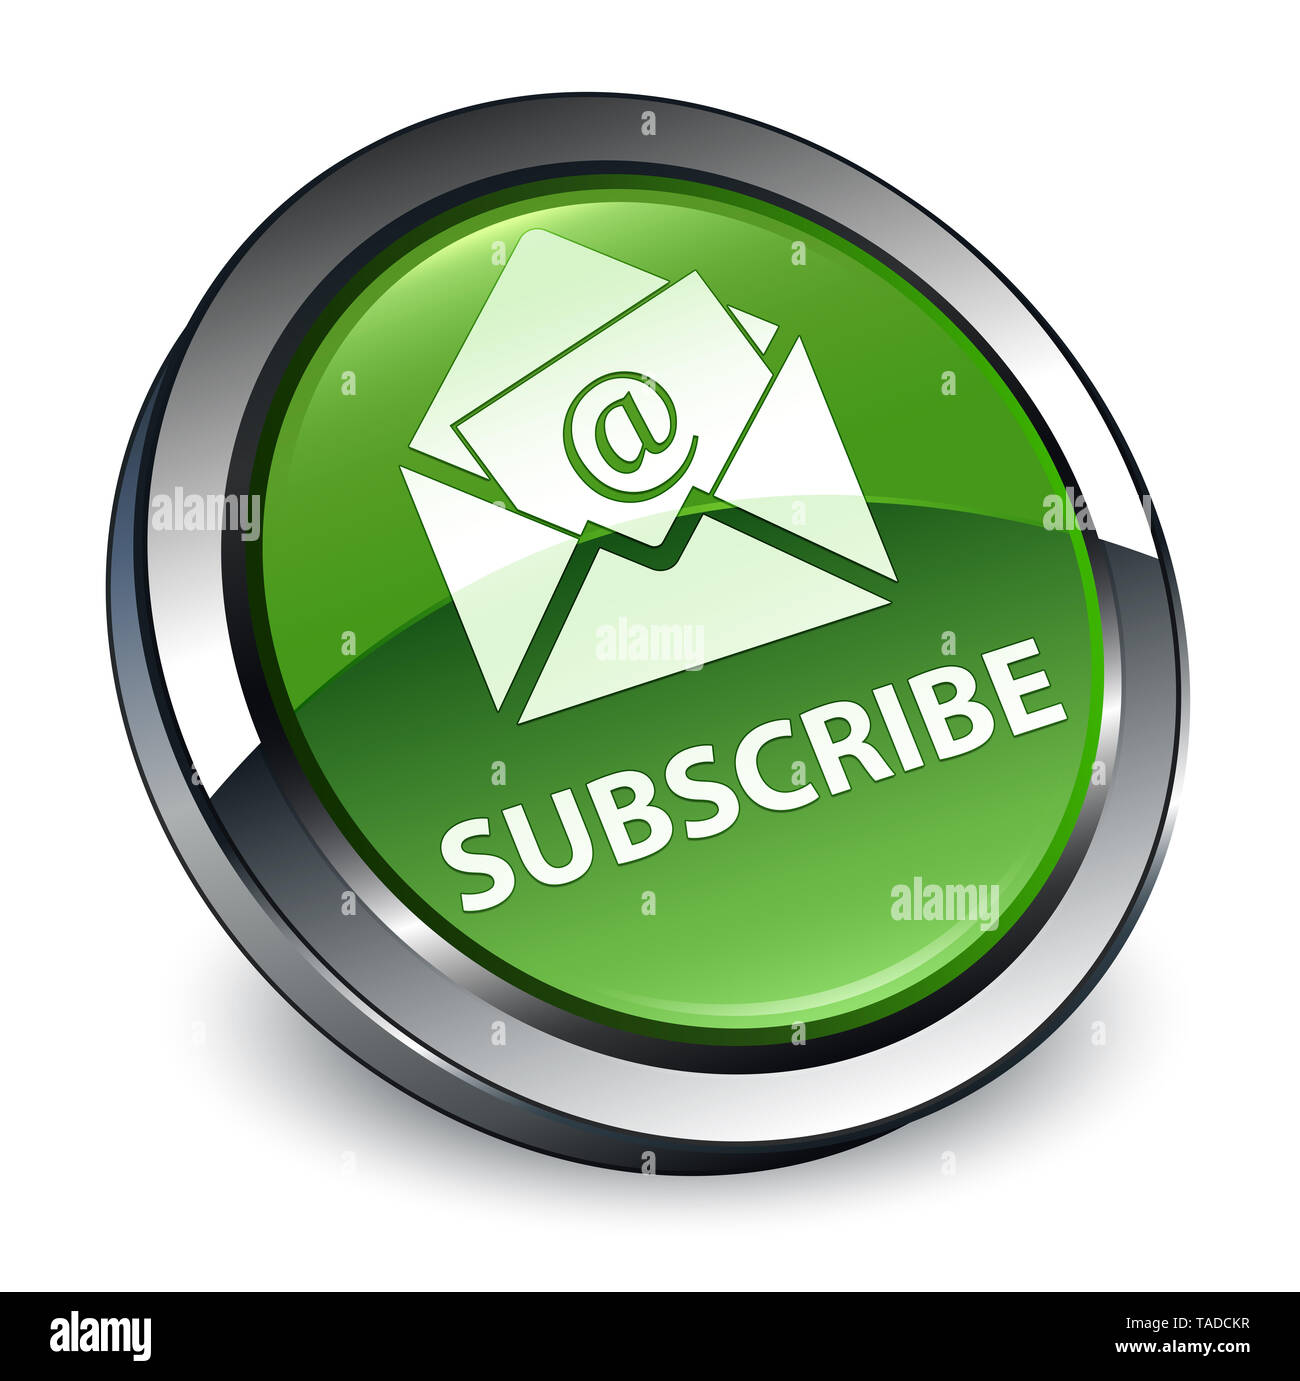 Subscribe Newsletter Email Icon Isolated On 3d Soft Green Round Button Abstract Illustration Stock Photo Alamy